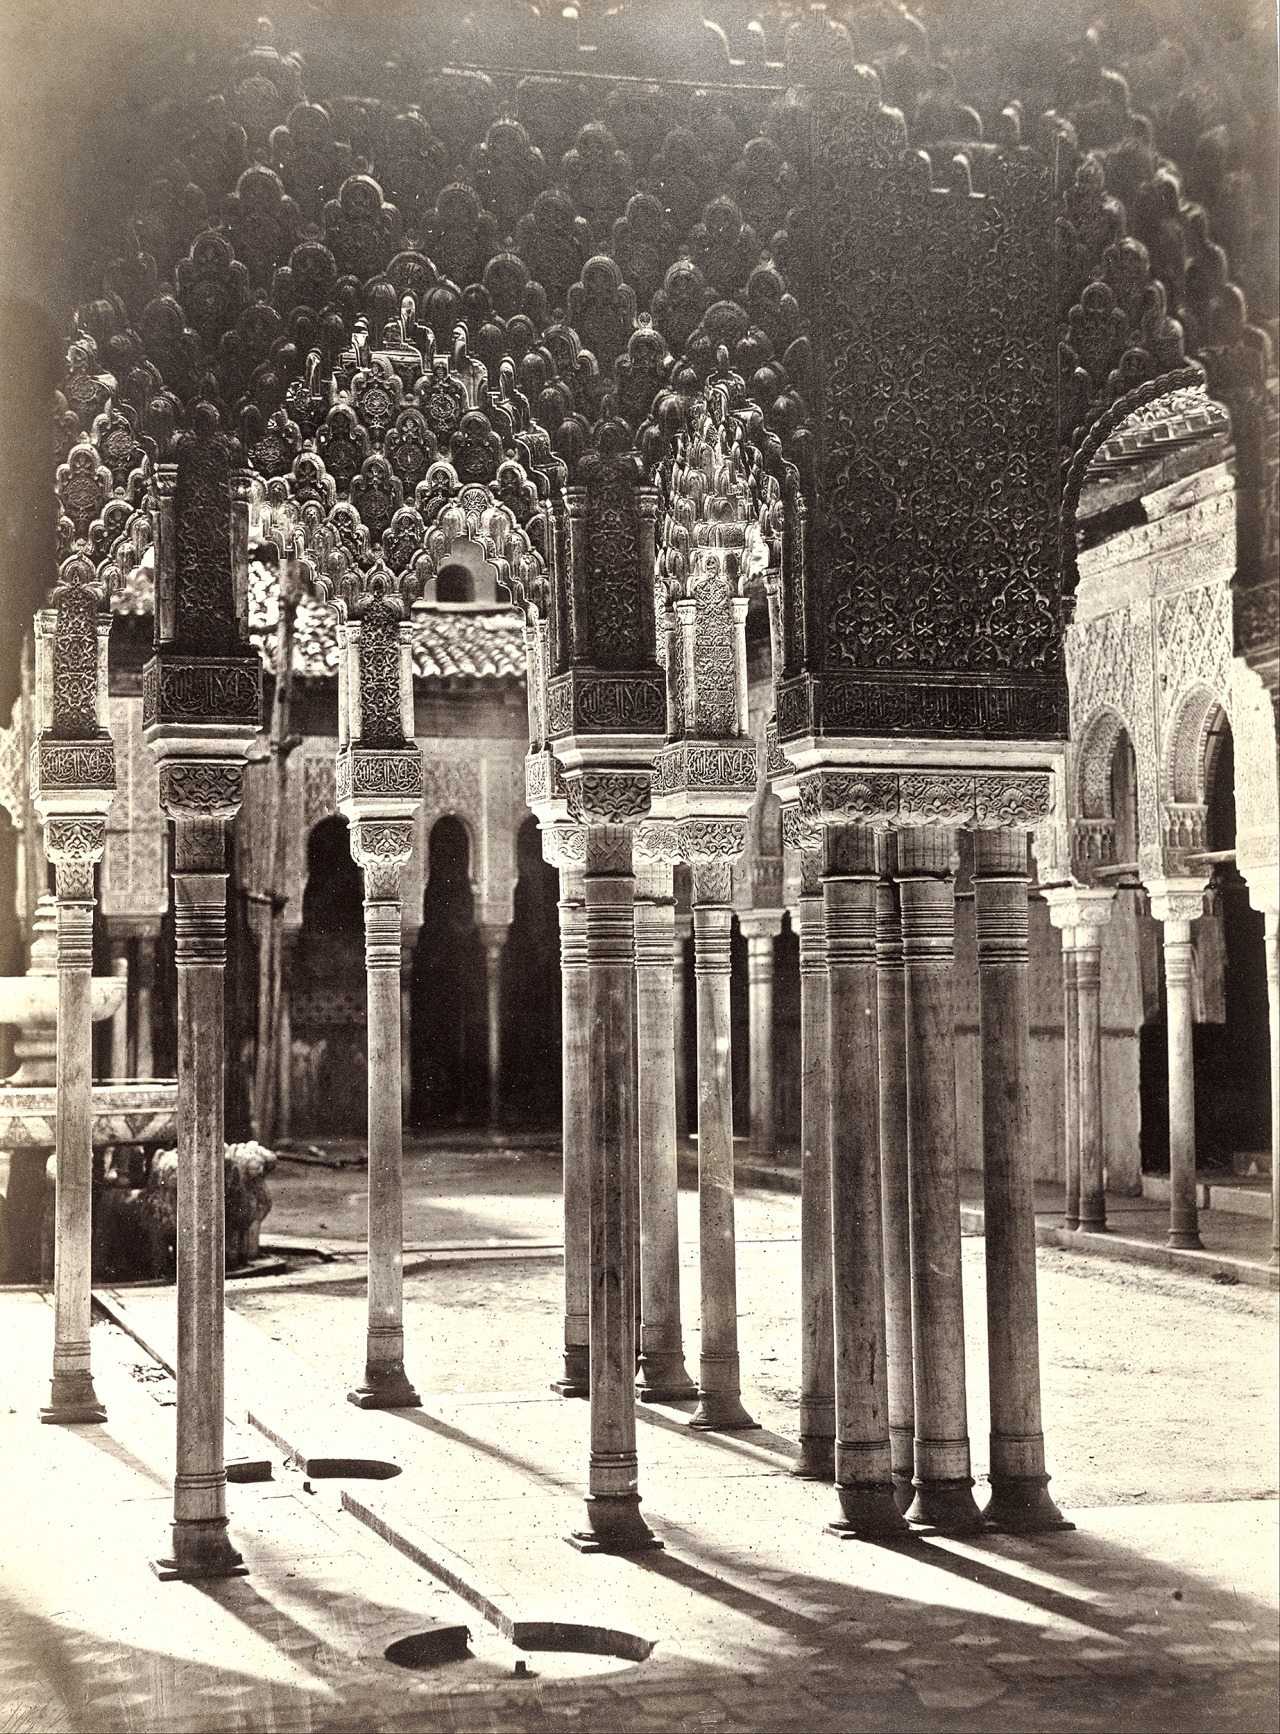 “Charles Clifford: Court of the Lions in the Alhambra, Spain, 1862
”